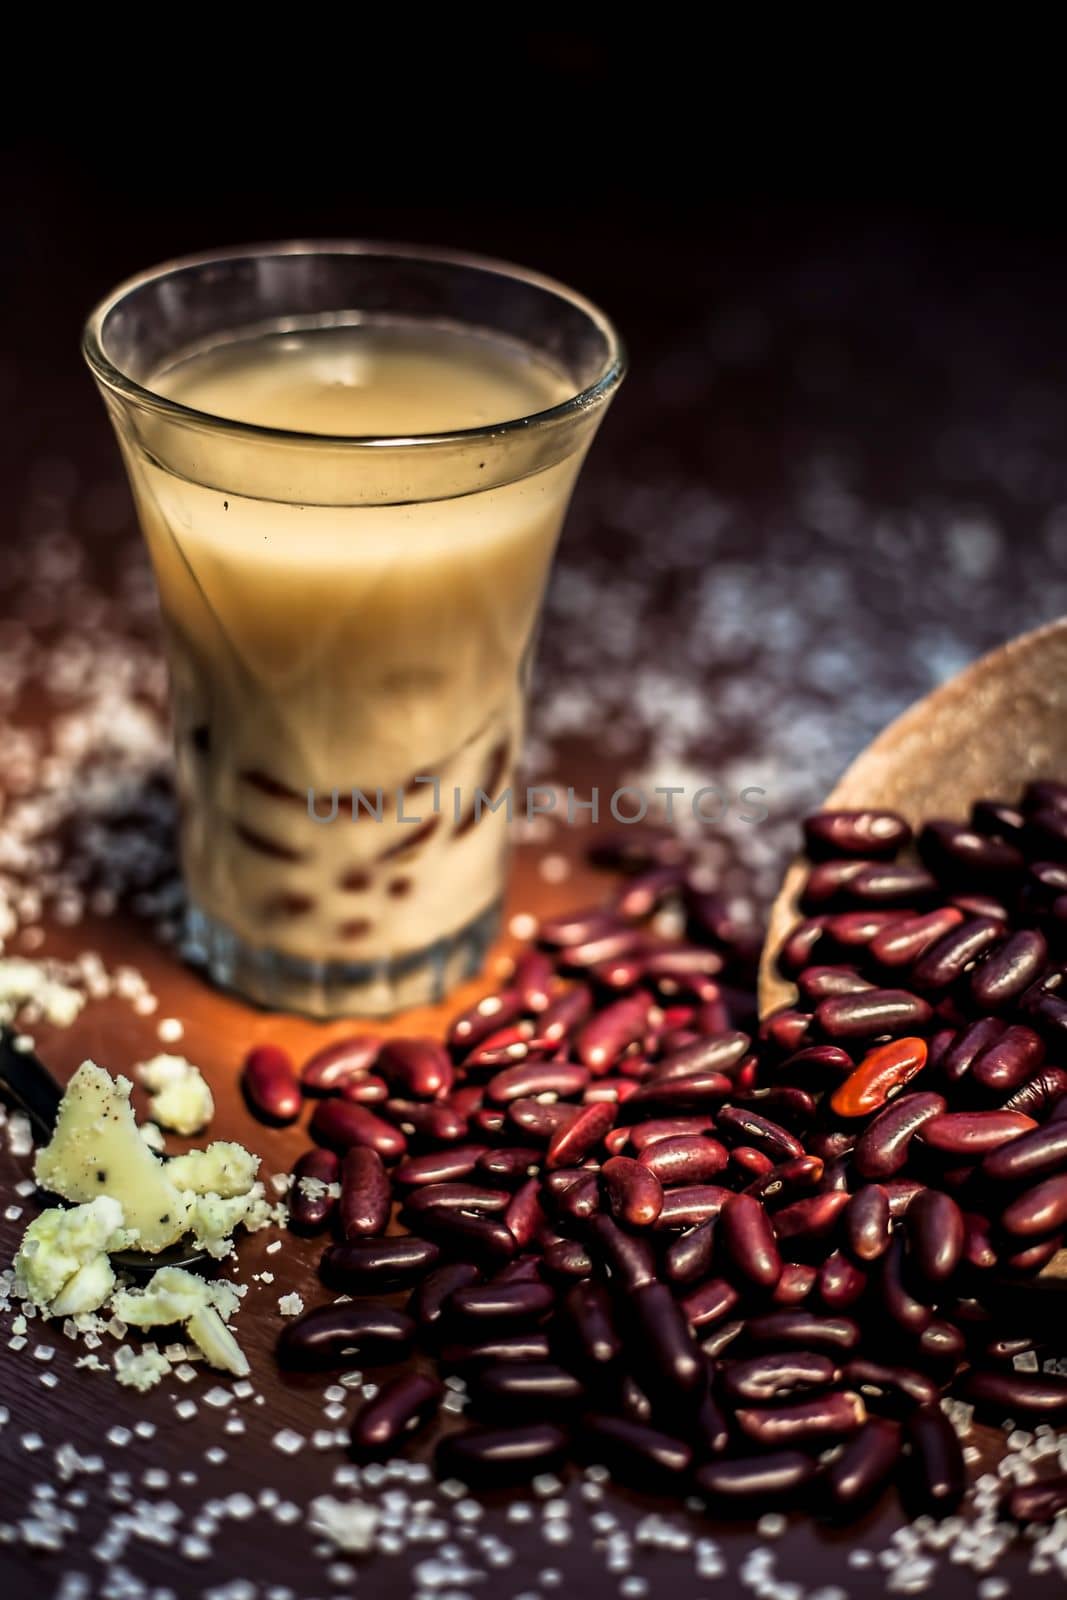 Red bean bubble tea in a glass along with some raw kidney beans, butter and sugar on the brown surface with Rembrandt light technique. Vertical shot. by mirzamlk